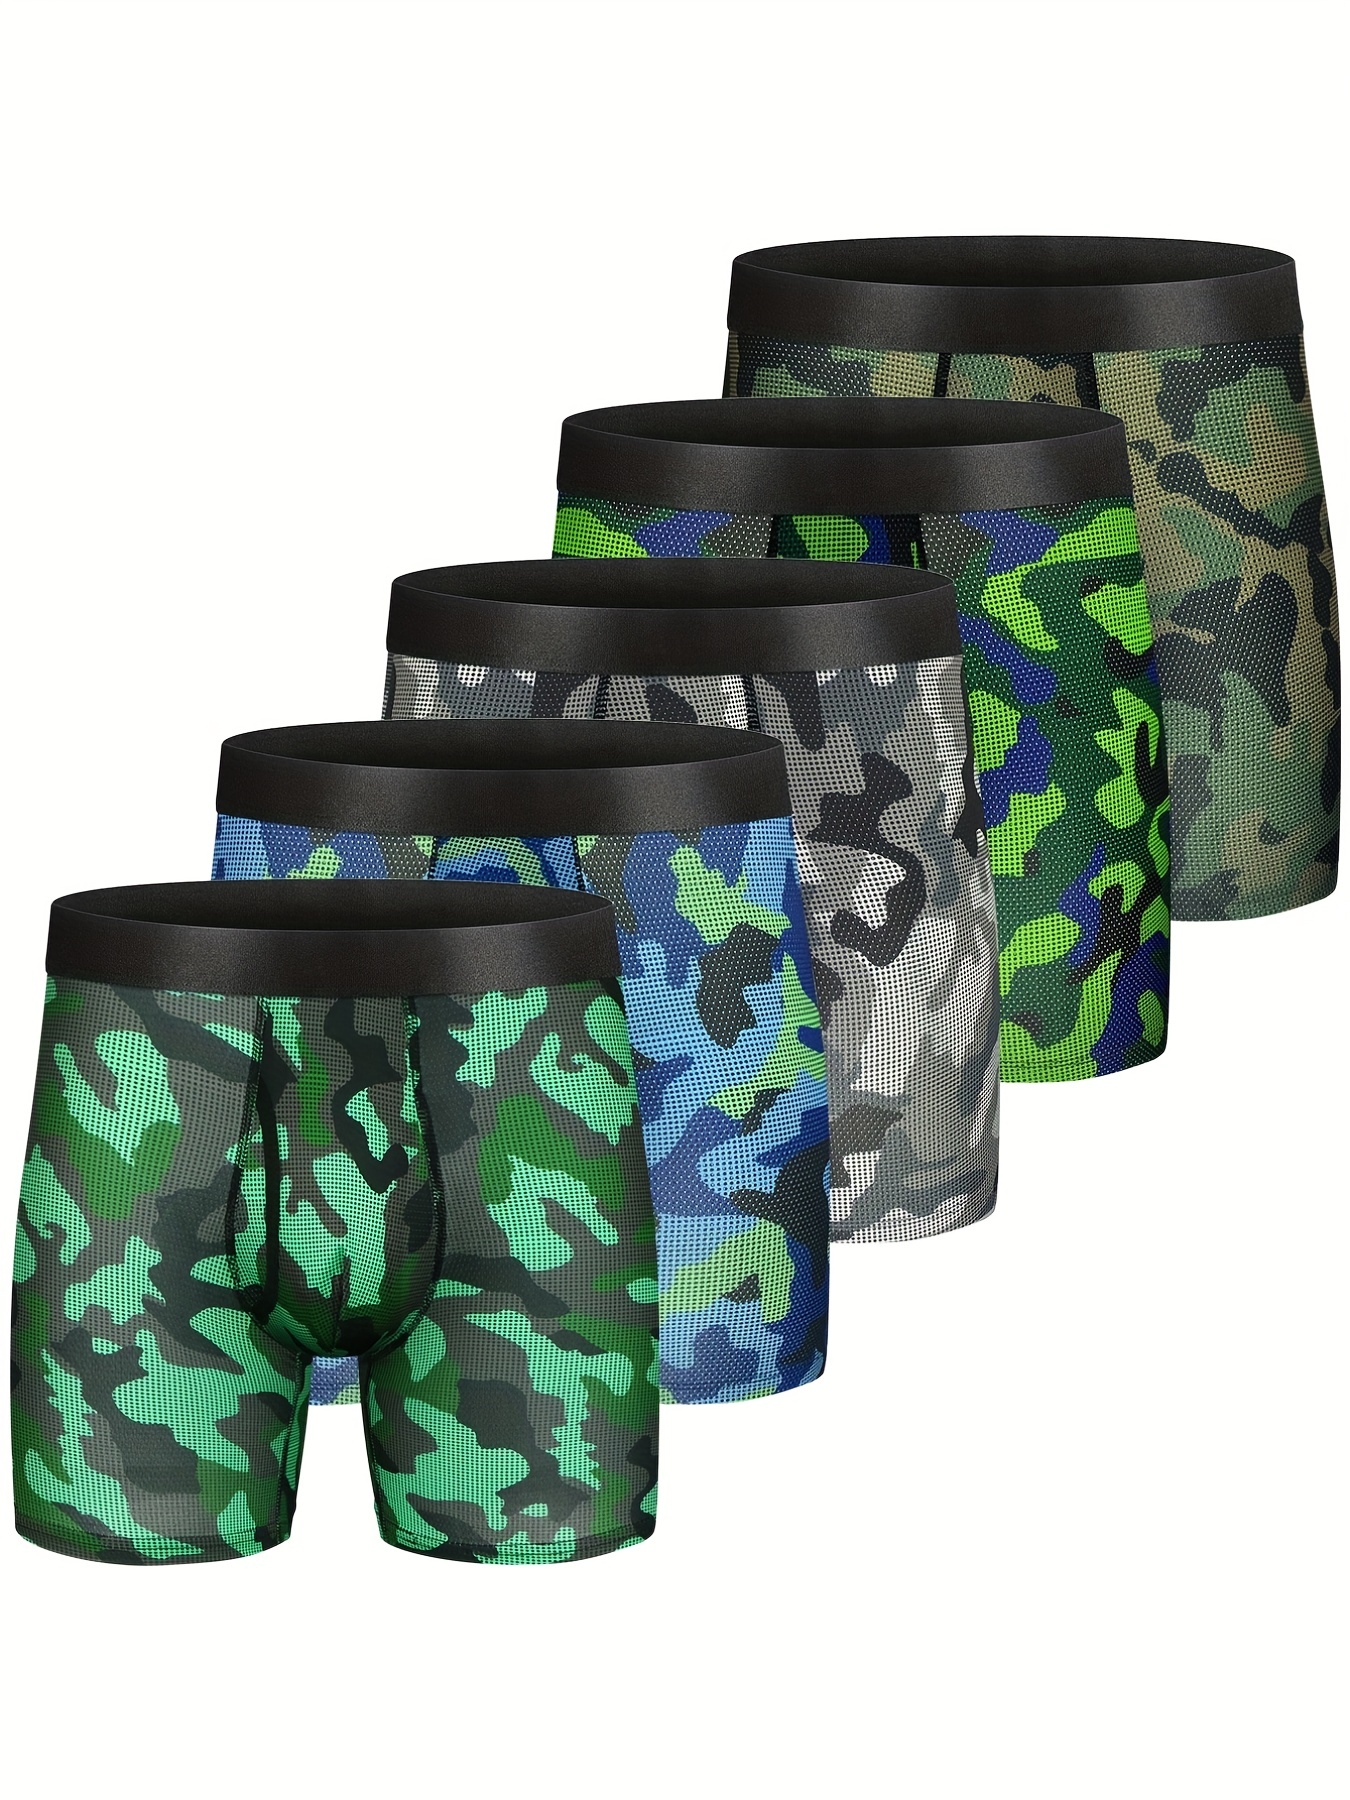 Green Camo Men's Boxer Briefs, Camouflage Military Army Sexy Best